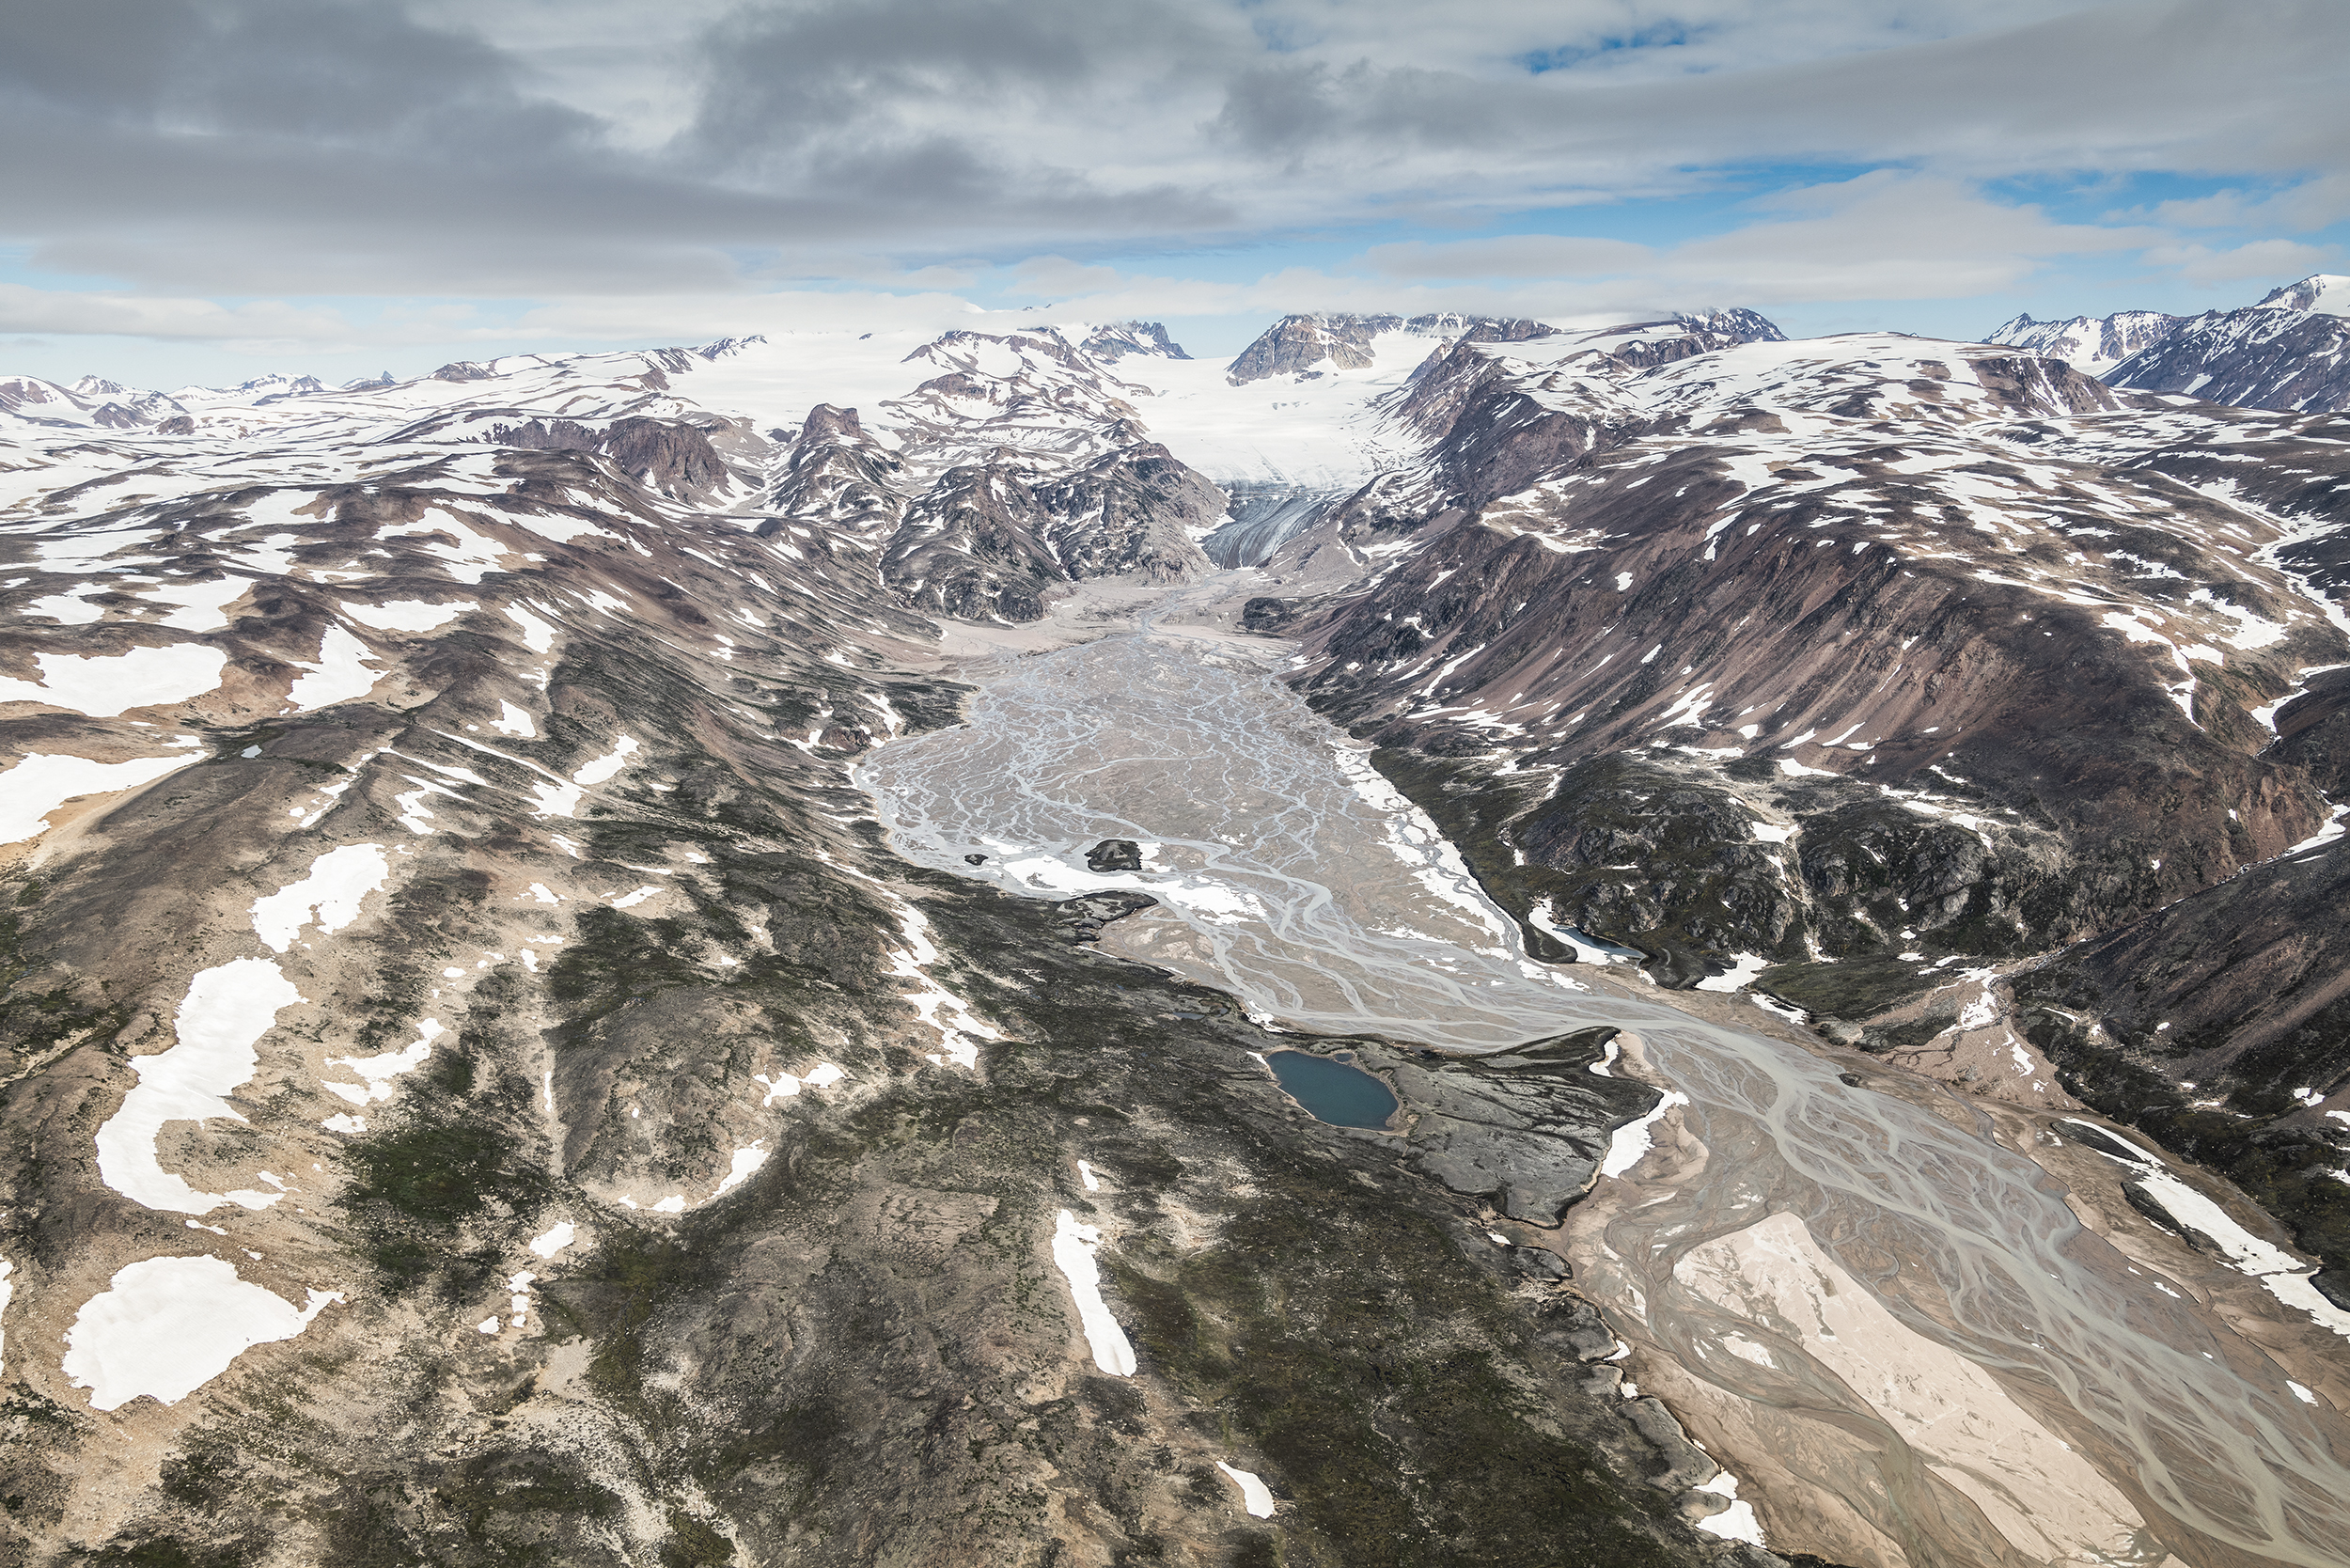 Areal landscape East Greenland. Photo by Carsten Egevang - Visit East Greenland